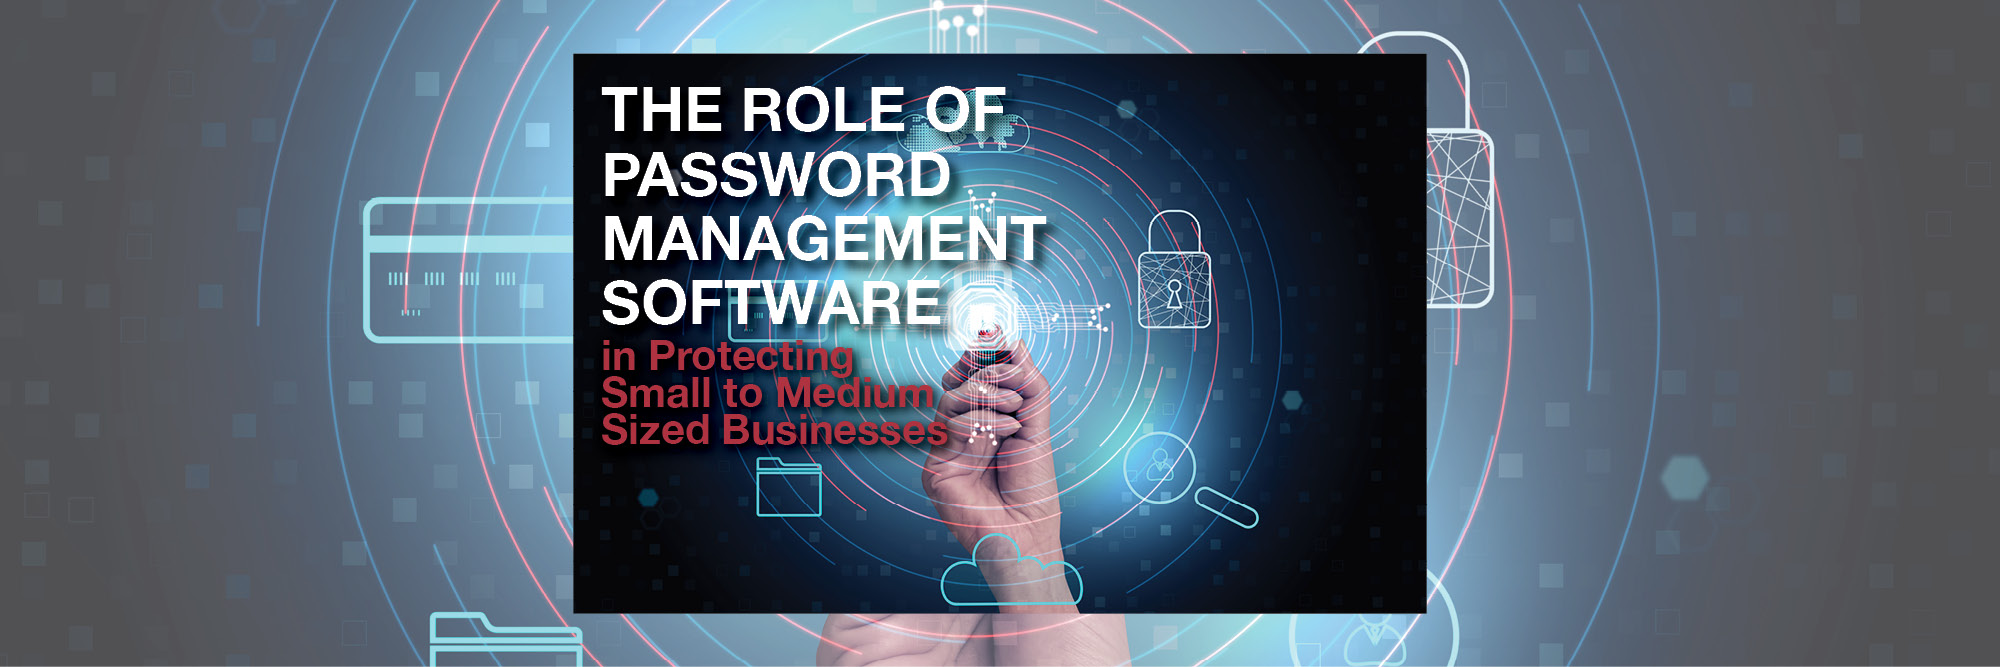 The Role of Password Management Software in Protecting Small to Medium Sized Businesses